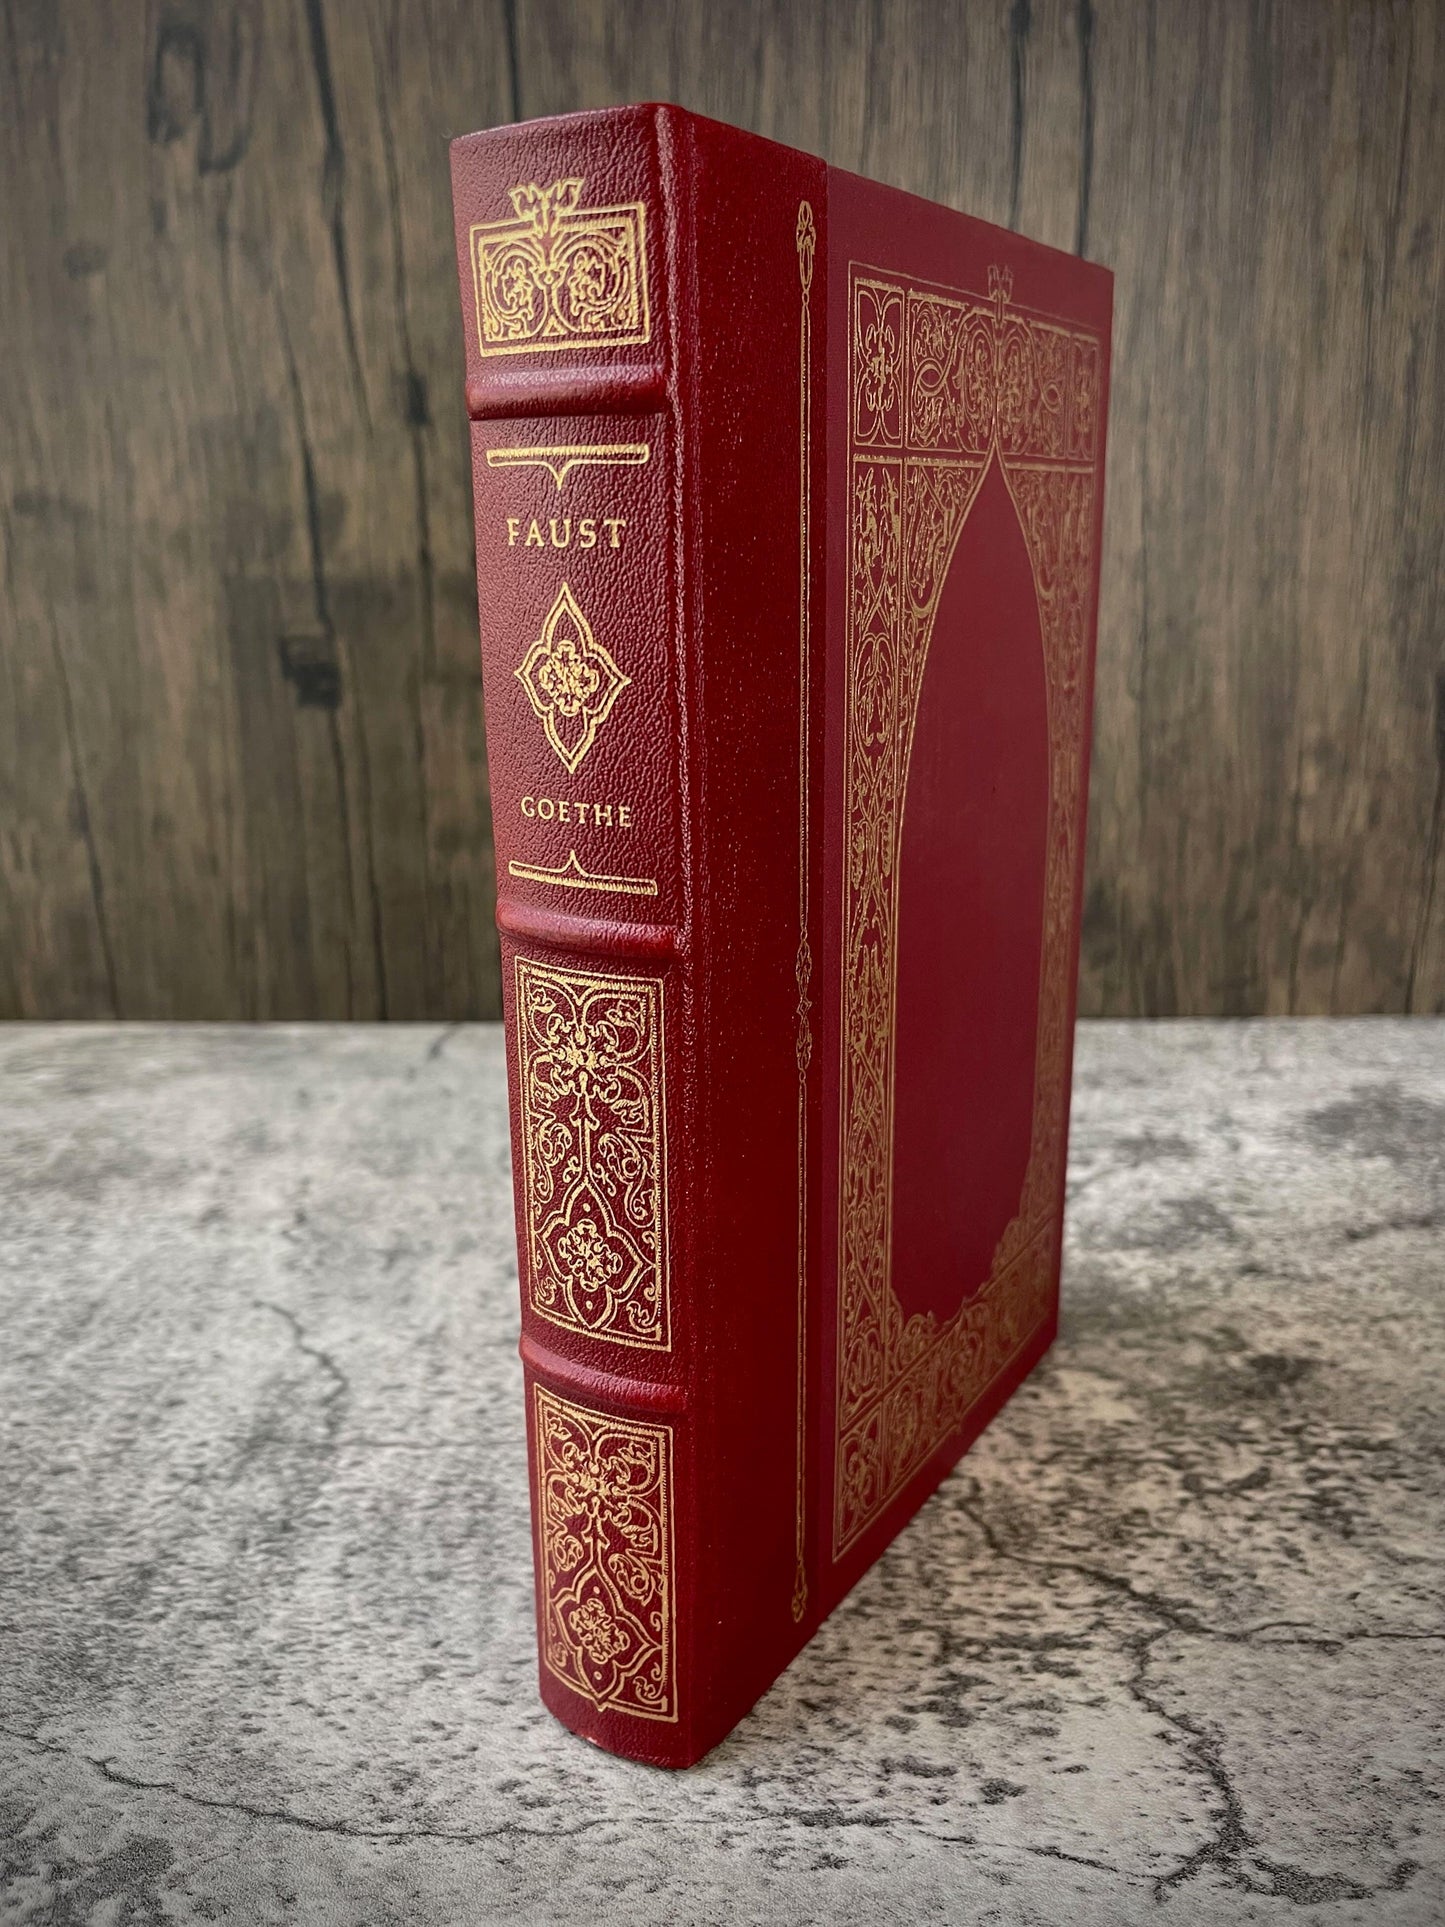 Faust / The Franklin Library / Quarter Bound Leather / 1981 - Precious Cache